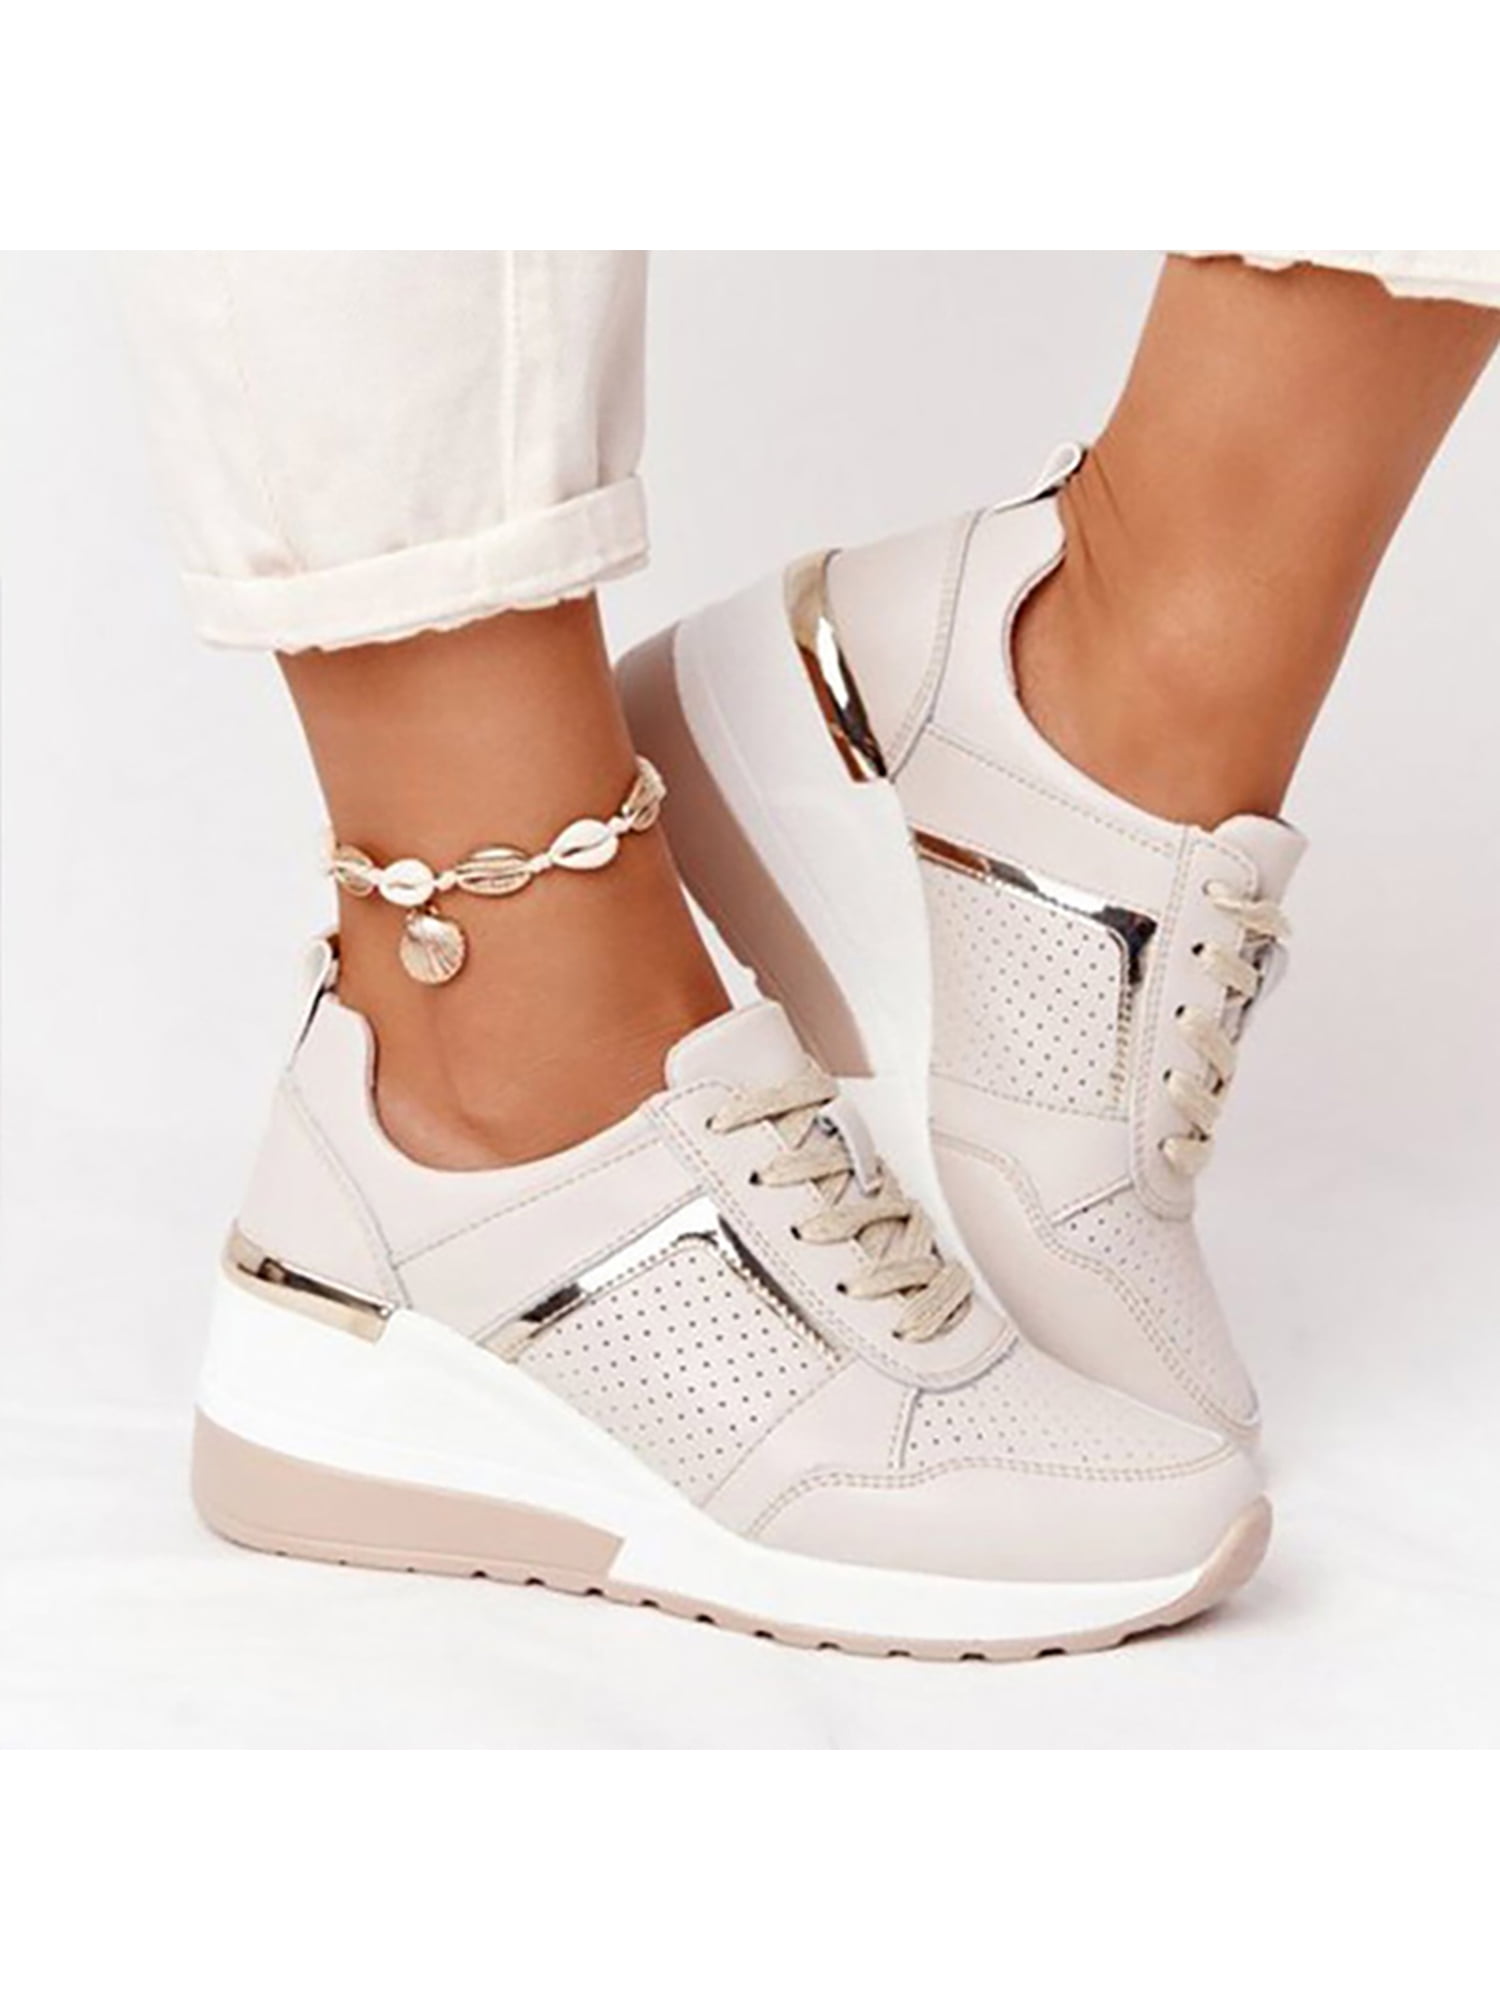 New Pink Mesh High Top Rhinestone Comfy Casual Party Wedge Platform Sneakers Sho 